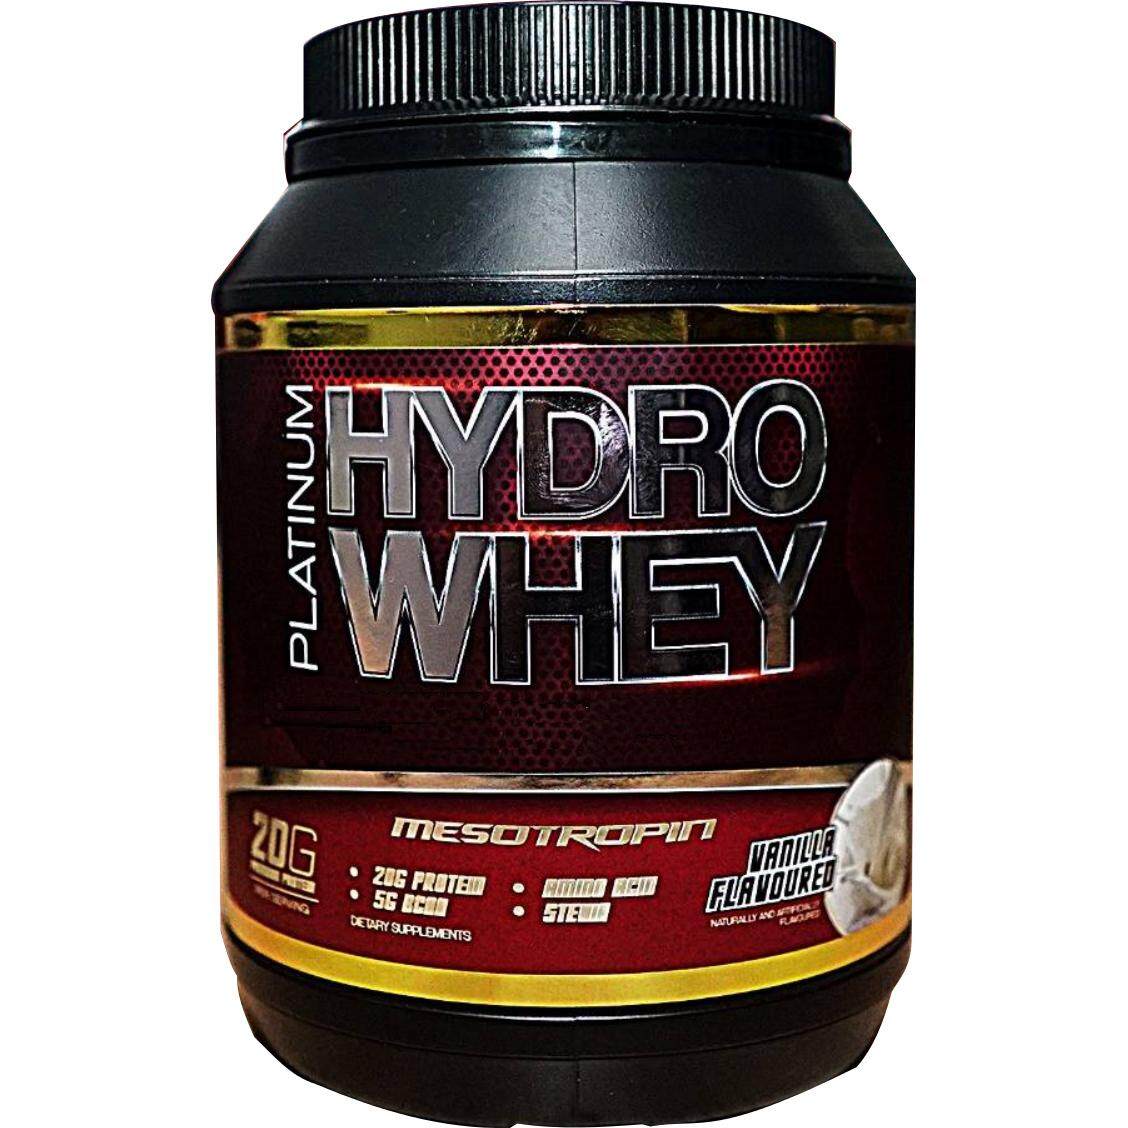 Hydro Whey Protein (Halal) (Vanilla Flavour) - New Mesotropin Fast Muscle Recovery (33 Servings)